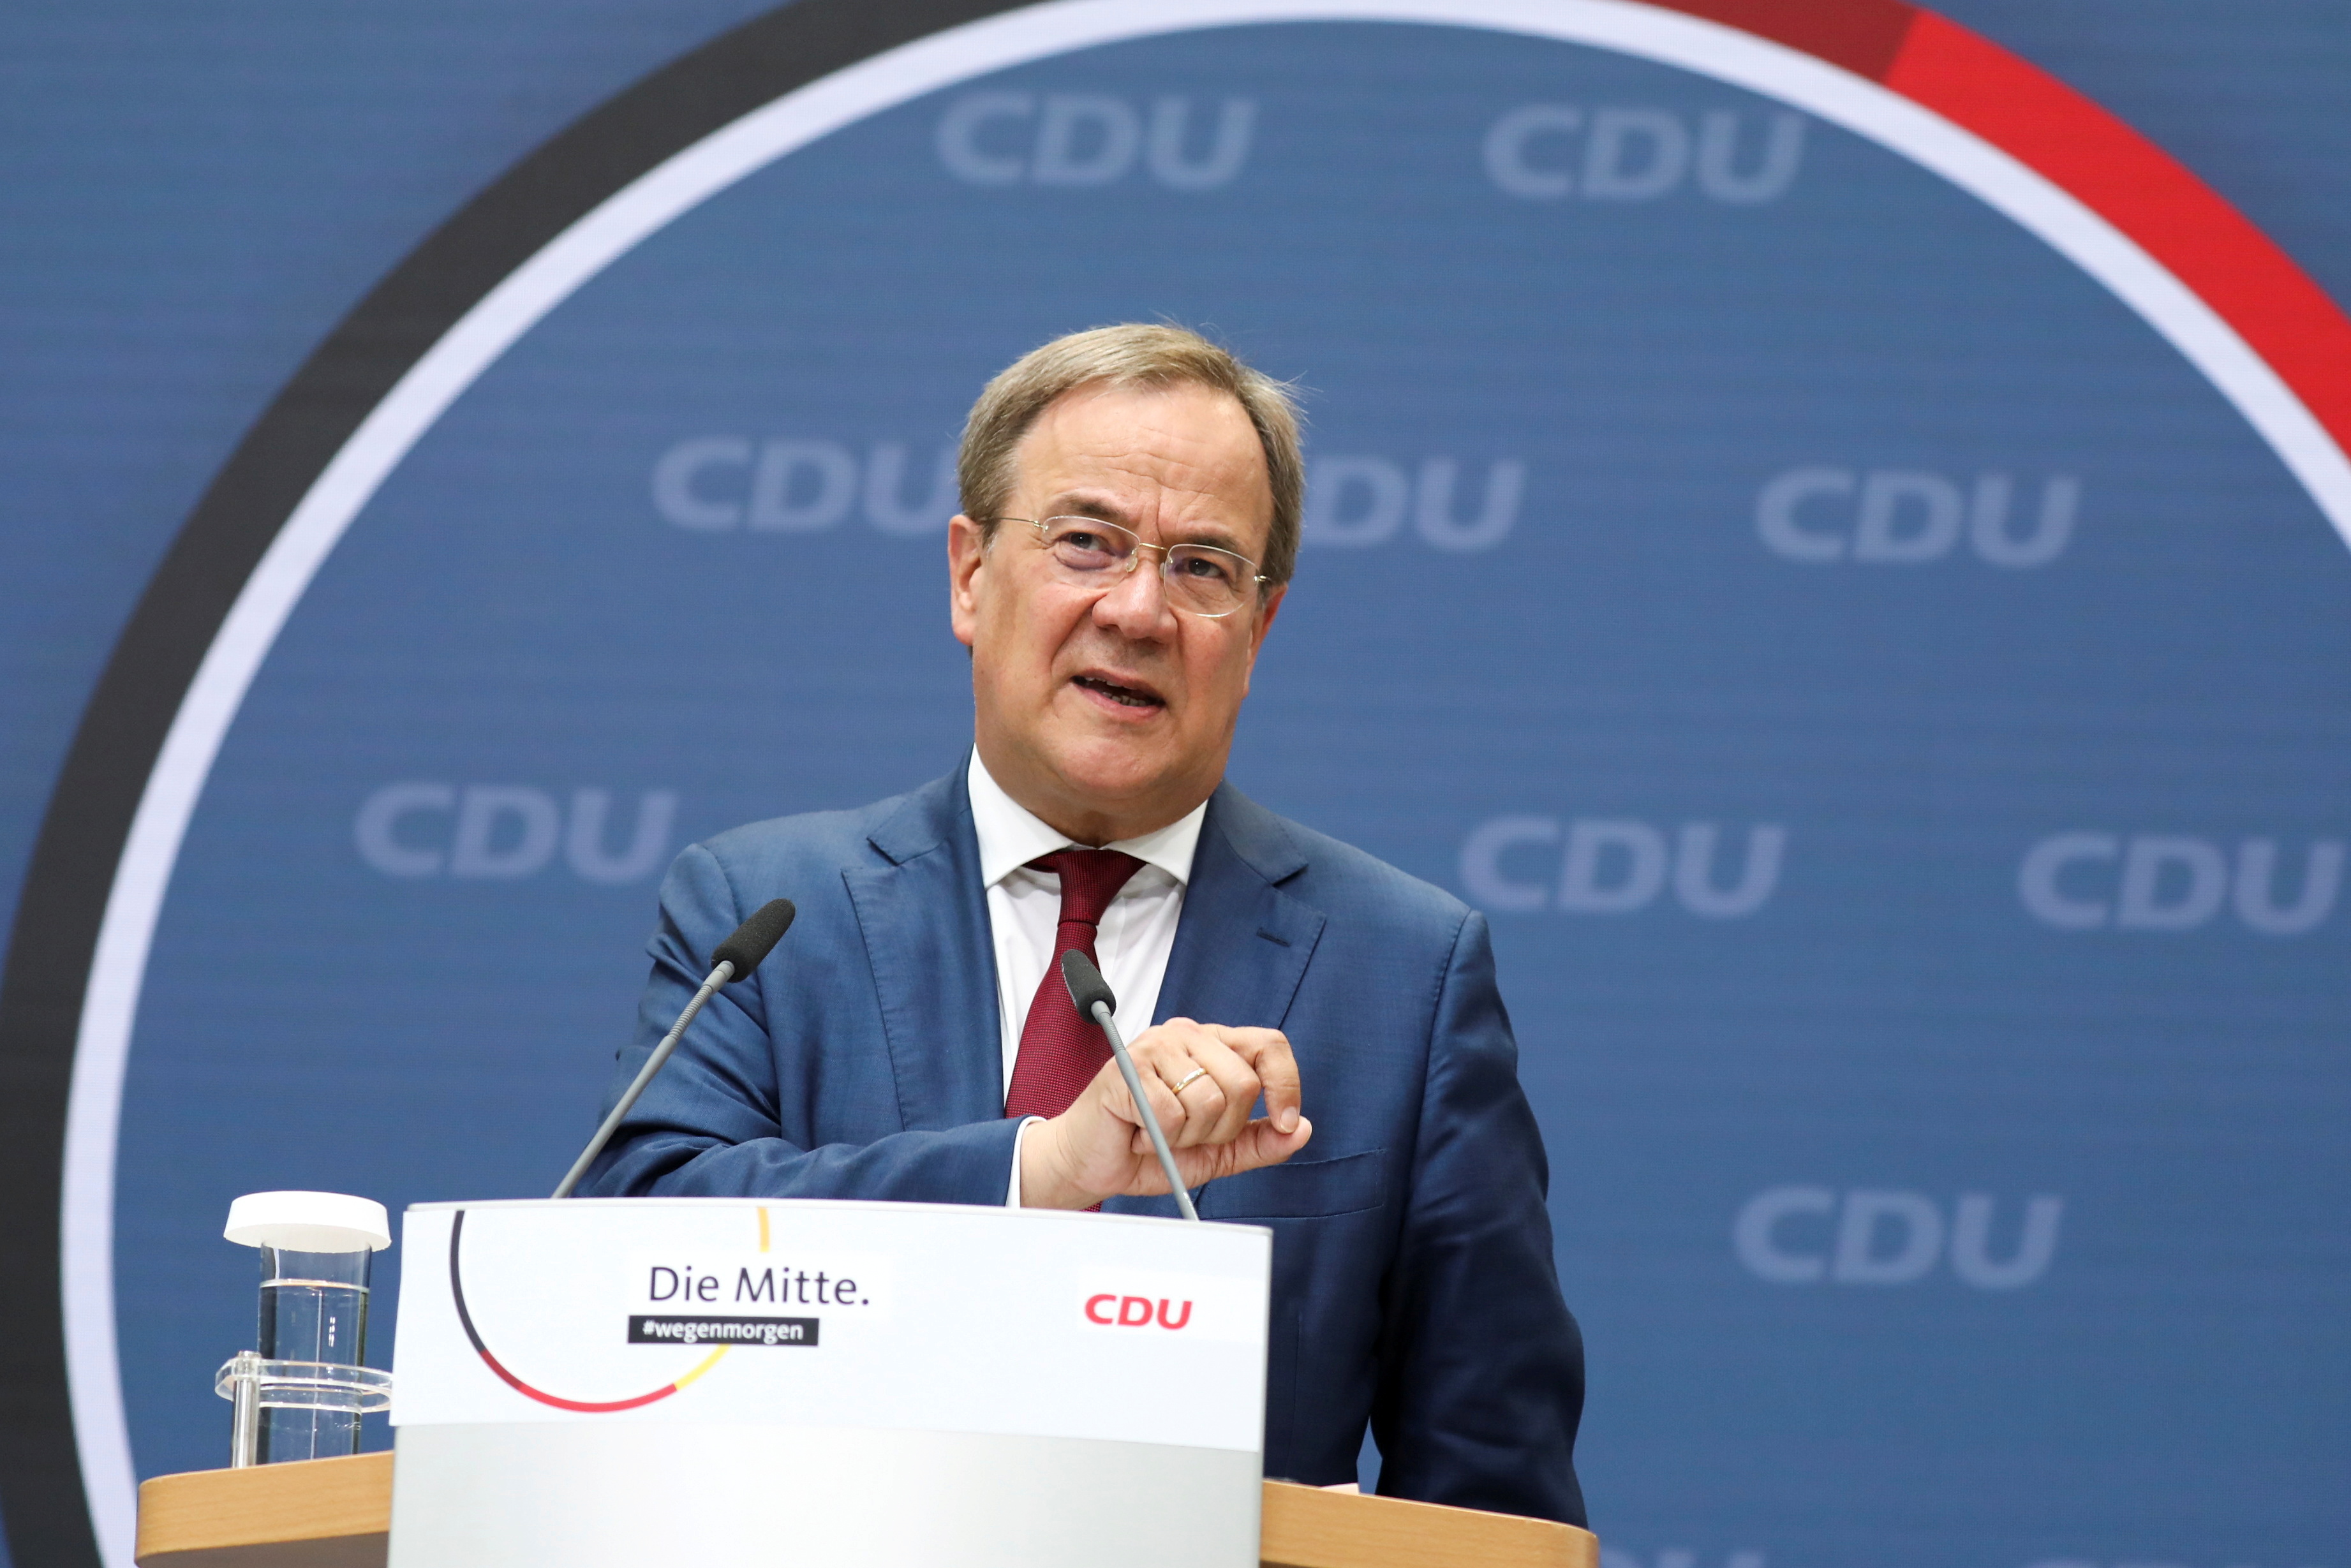 CDU party leader Laschet attends news conference in Berlin